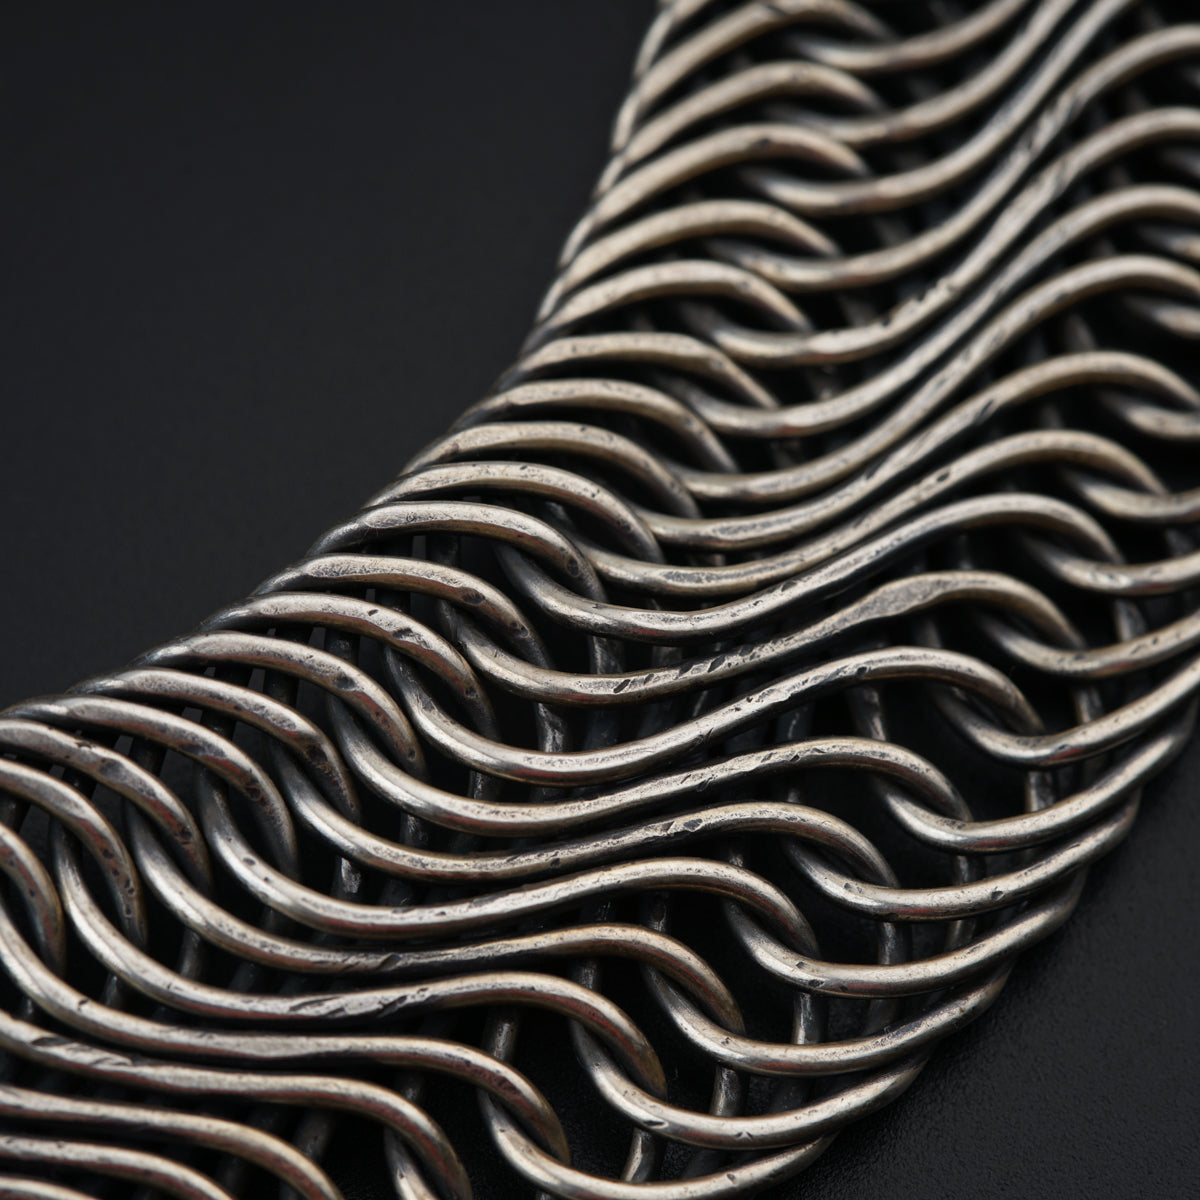 a close up of a metal chain on a black surface